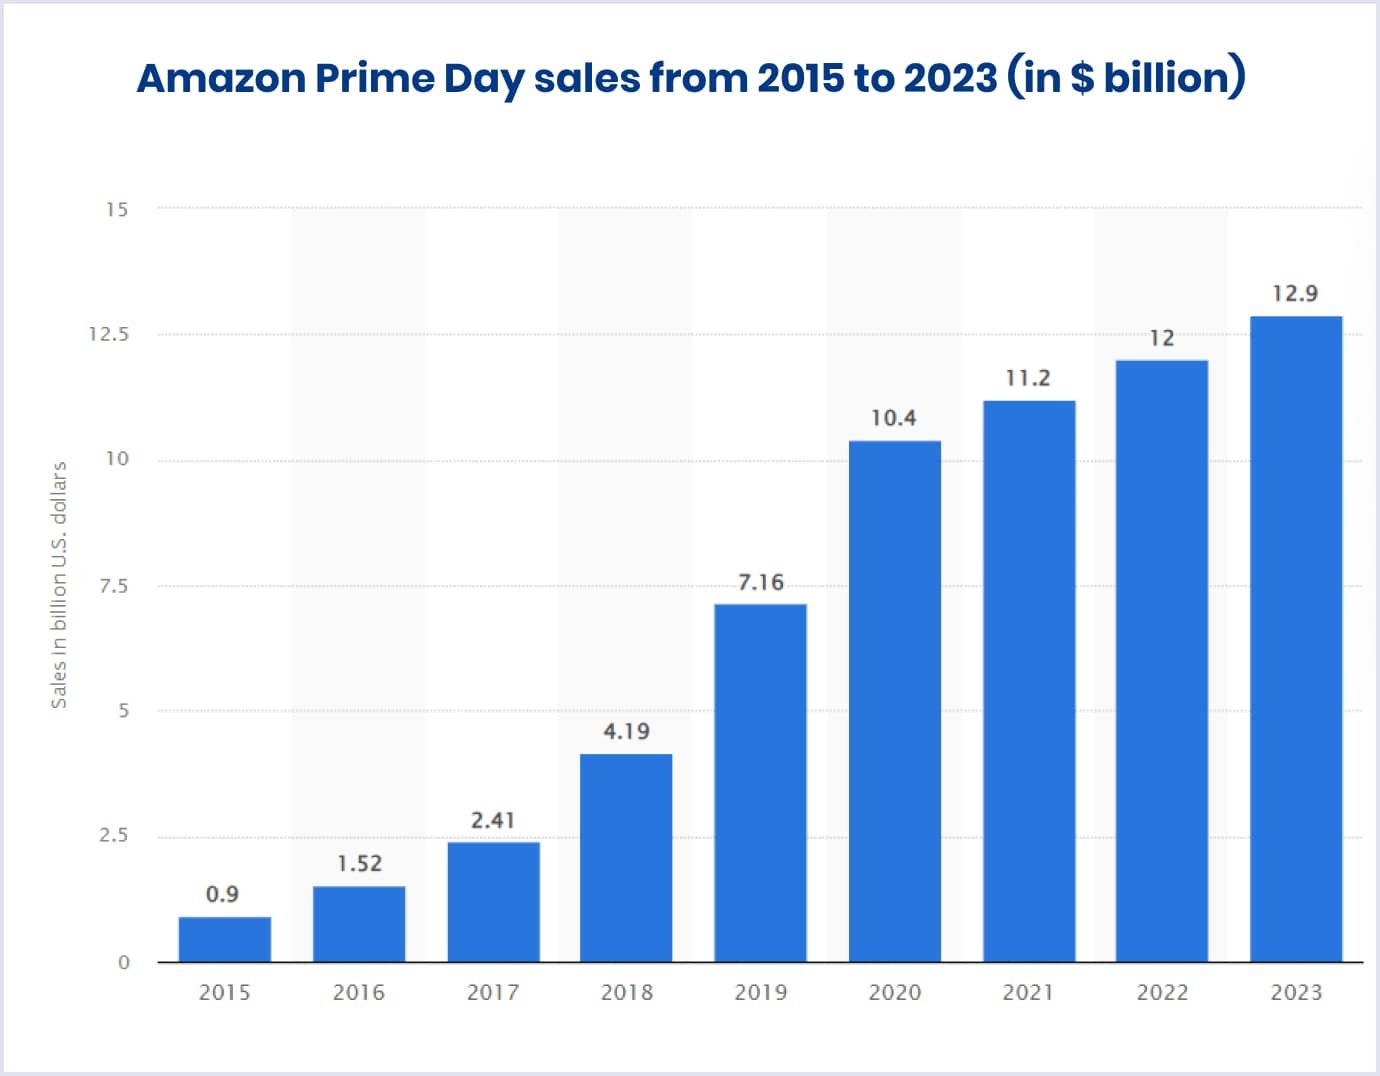 Amazon Prime Day sales from 2015 to 2023